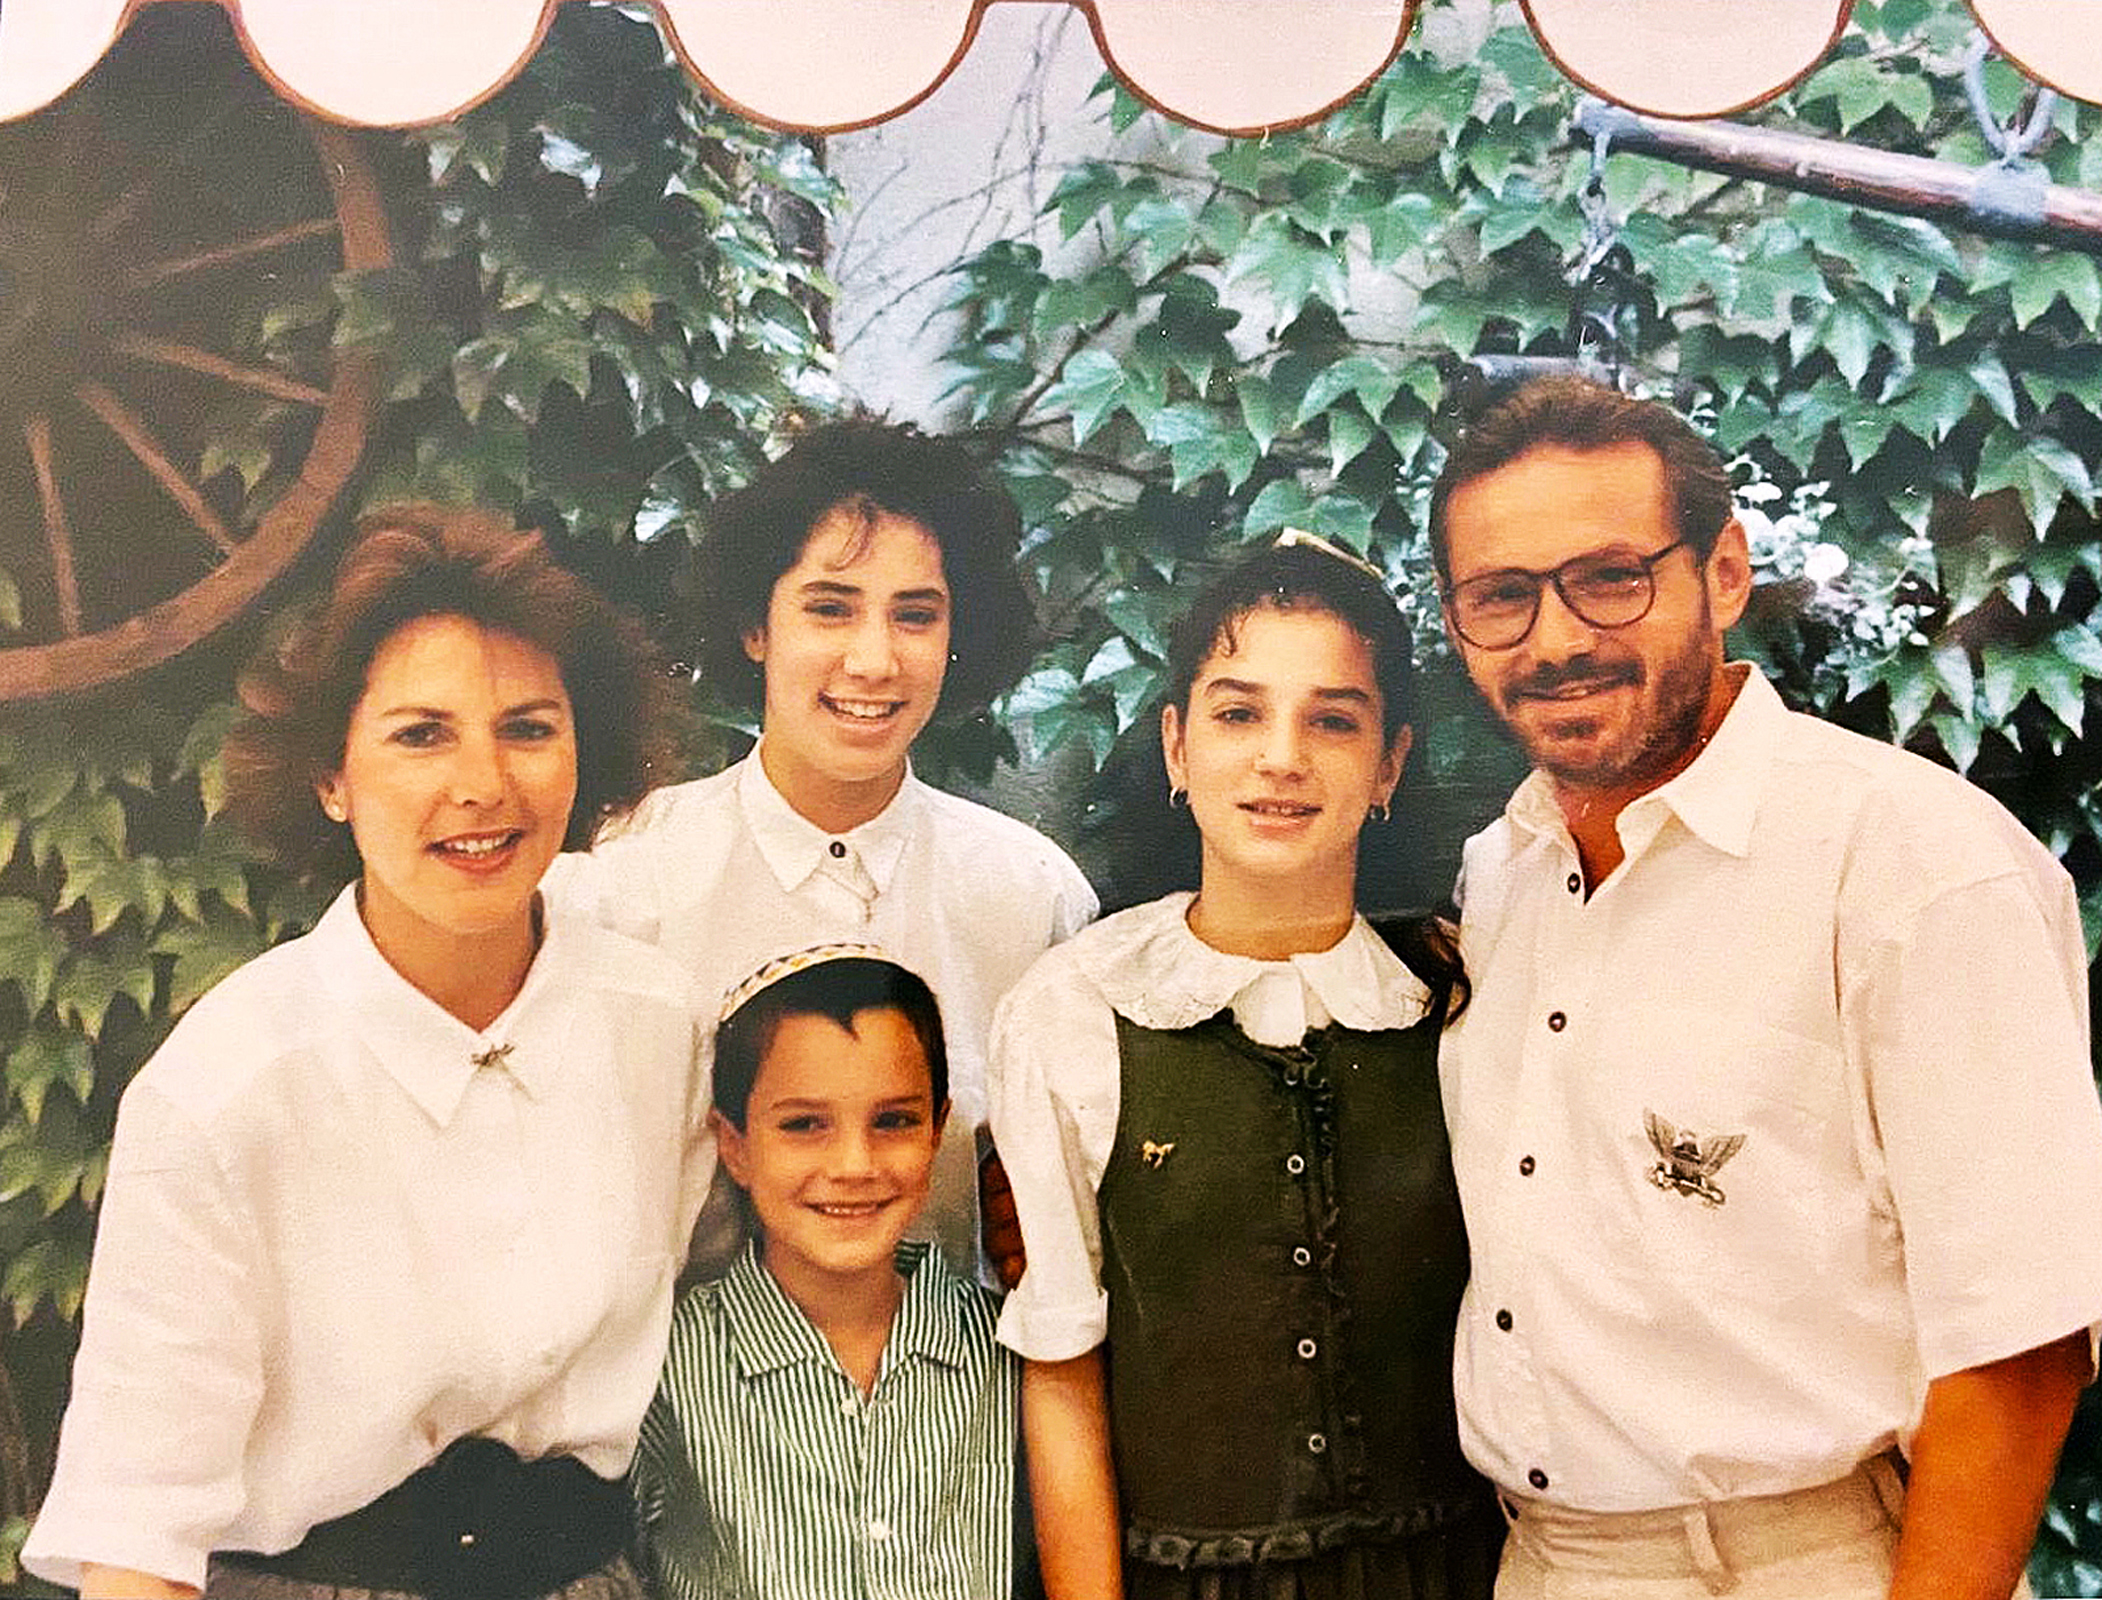 Dr. Kahn with his family.